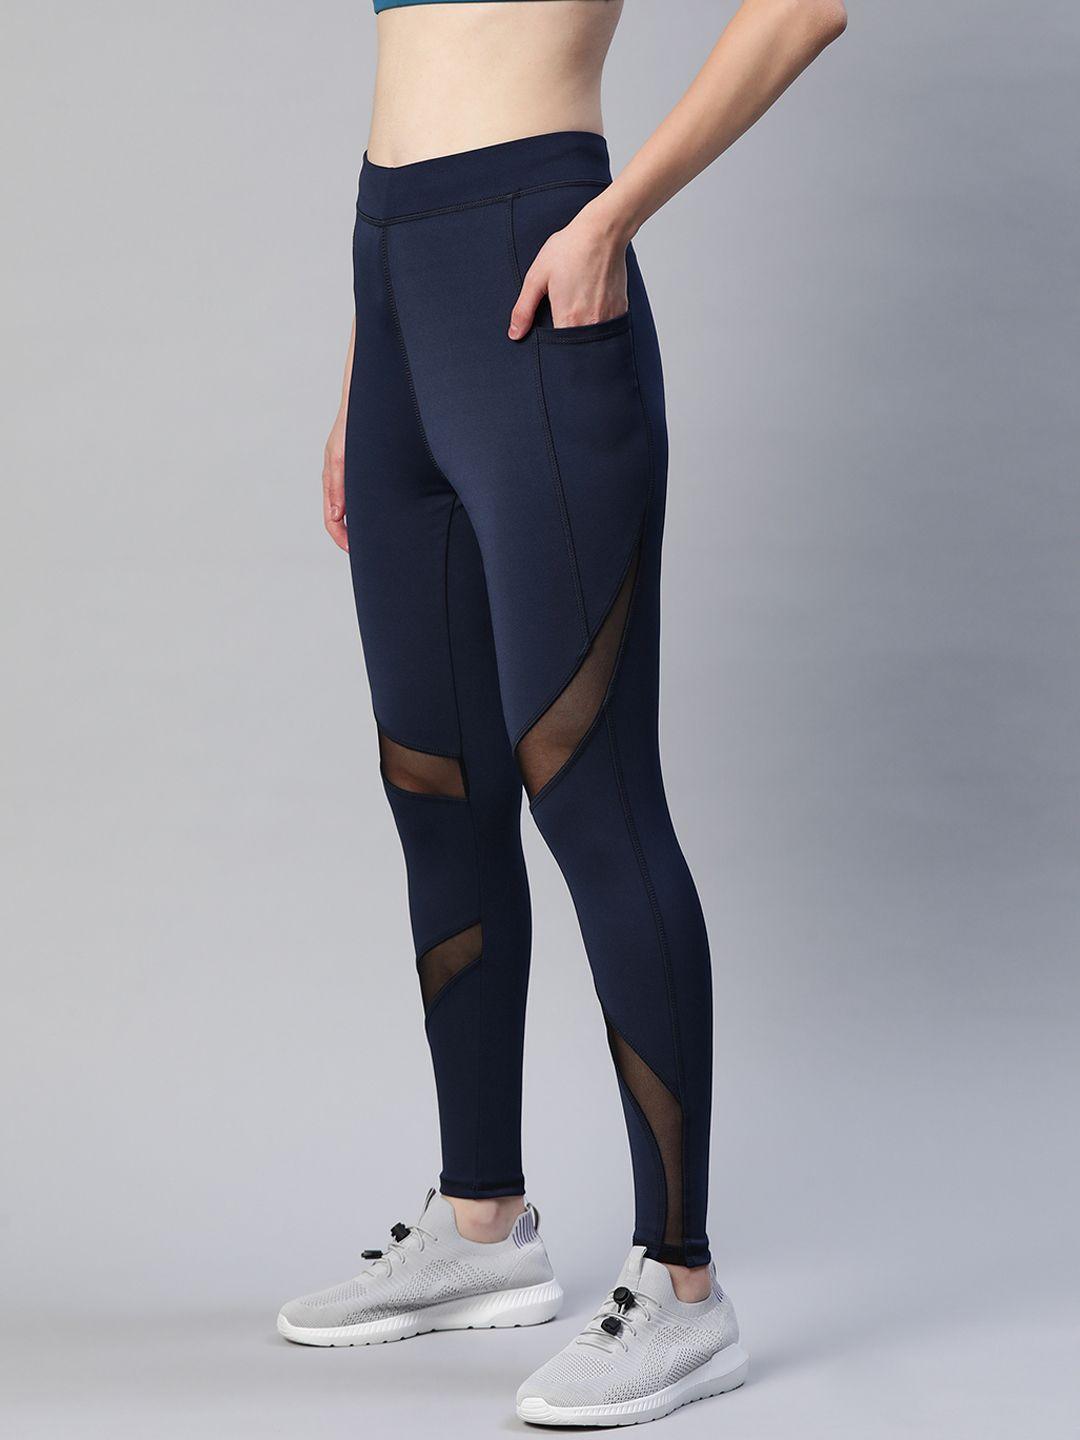 blinkin women navy blue rapid dry tights with breathable mesh panels & side pockets